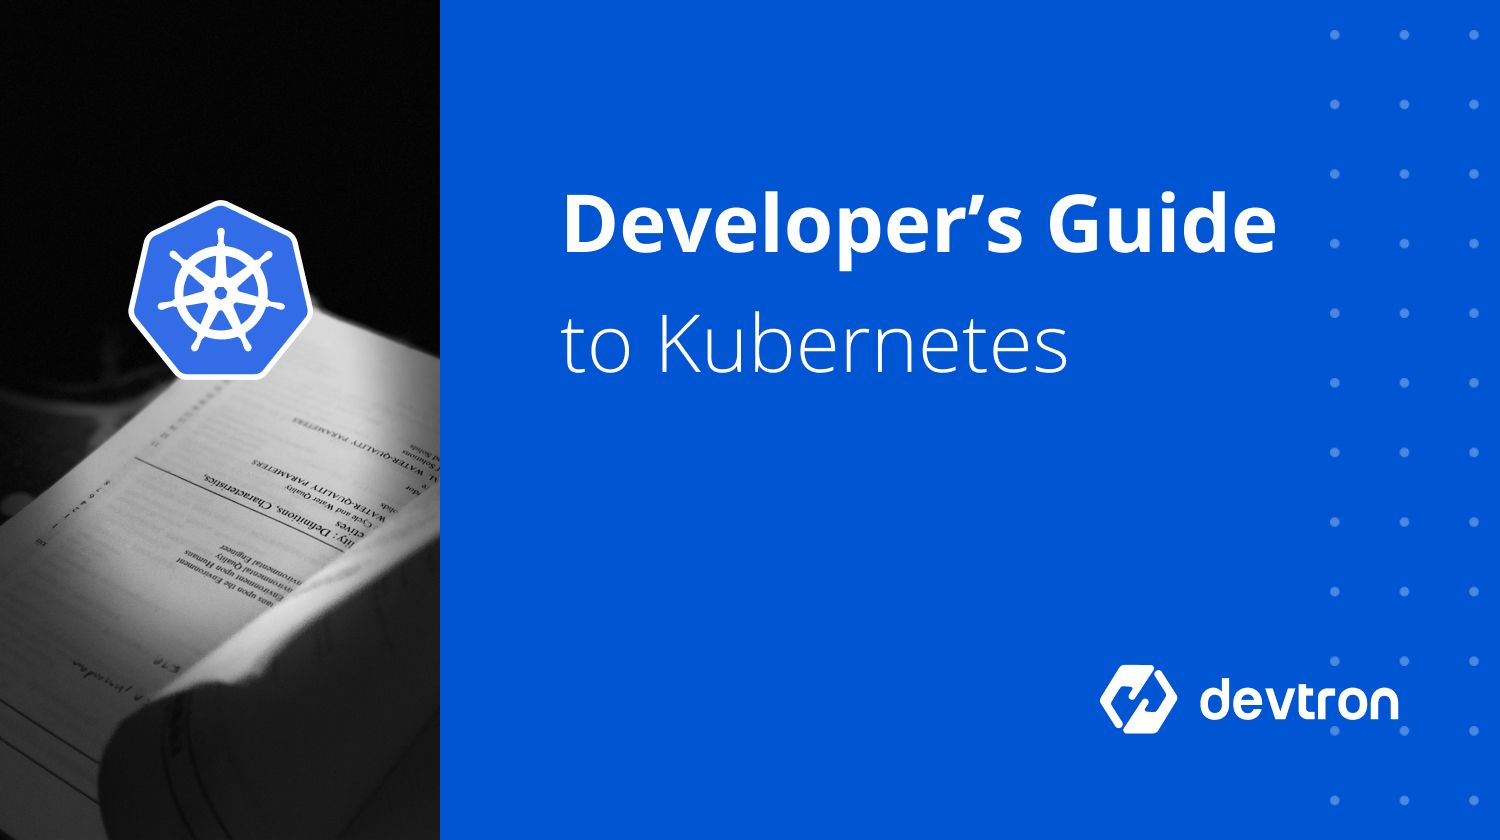 A Developers Guide to Kubernetes